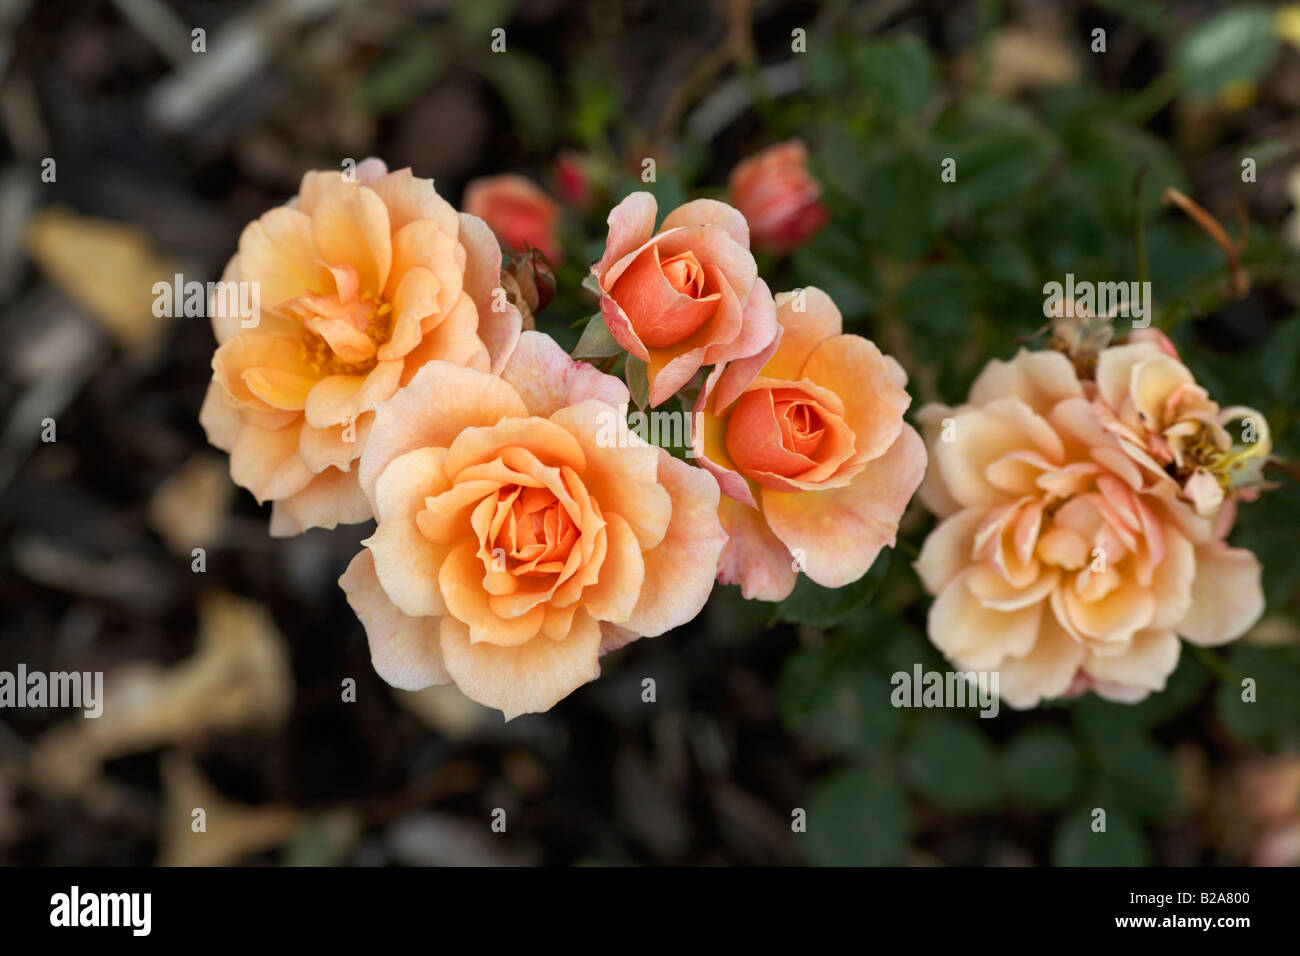 good wishes or favourite miniature rose plant with peach flowers Stock Photo